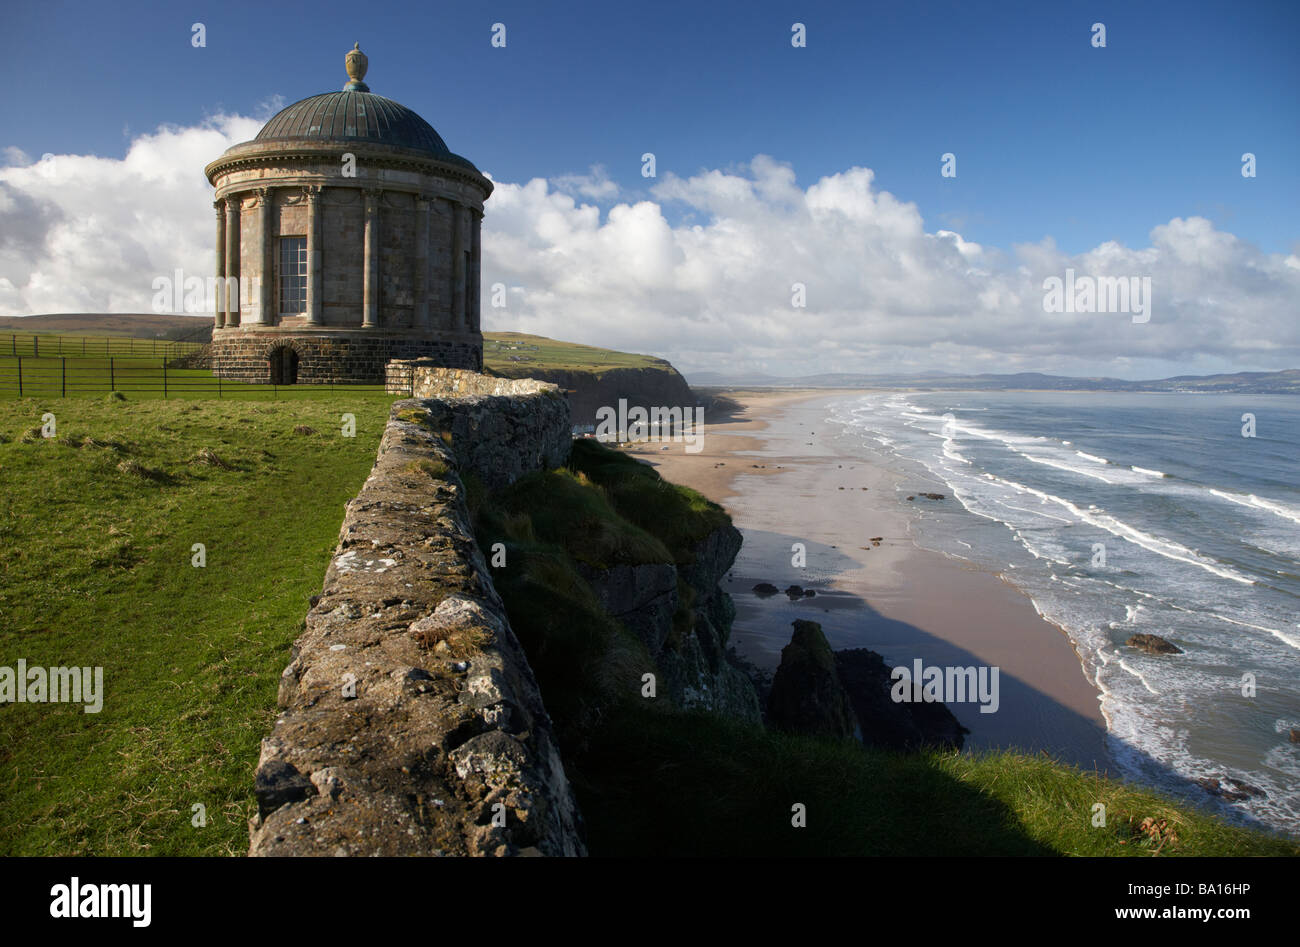 Mussenden Temple on the clifftop overlooking benone beach and downhill strand county londonderry derry northern ireland Stock Photo